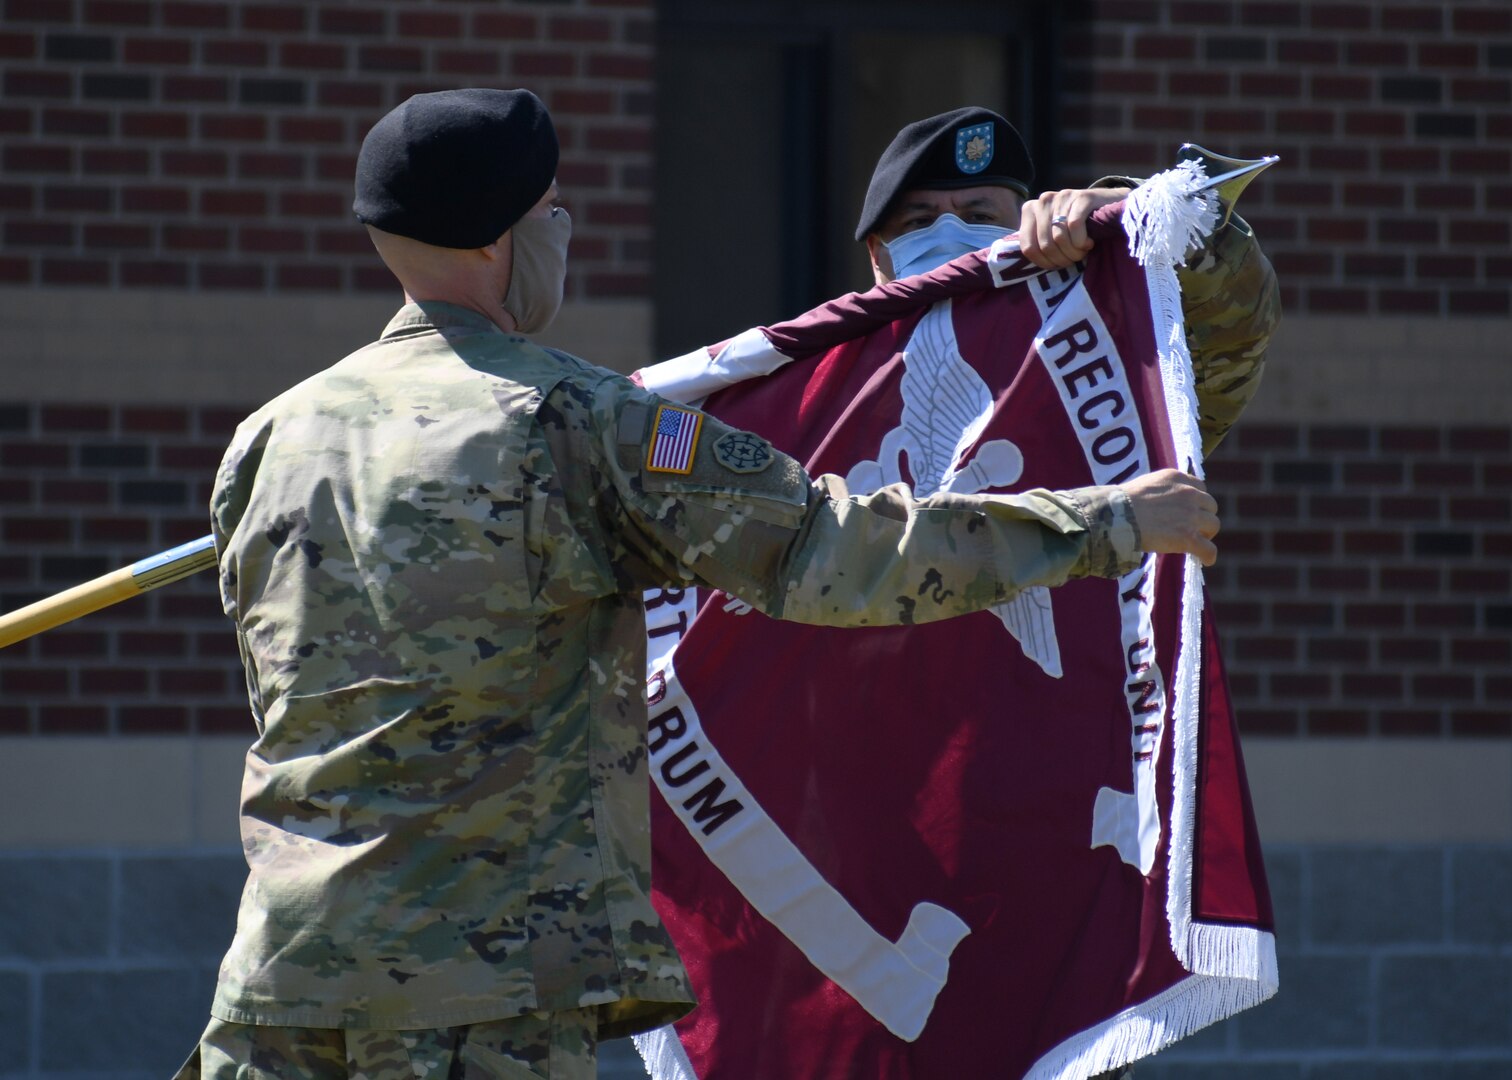 Lt. Col. Robert P. Venton (right) and Command Sgt. Maj. Gordon Lawitzke (left), the commander and senior enlisted leader respectively of the Fort Drum Soldier Recovery Unit, uncase the colors of the newly formed Fort Drum Soldier Recovery Unit (SRU) during a ceremony on Fort Drum, N.Y. June 16, 2020.